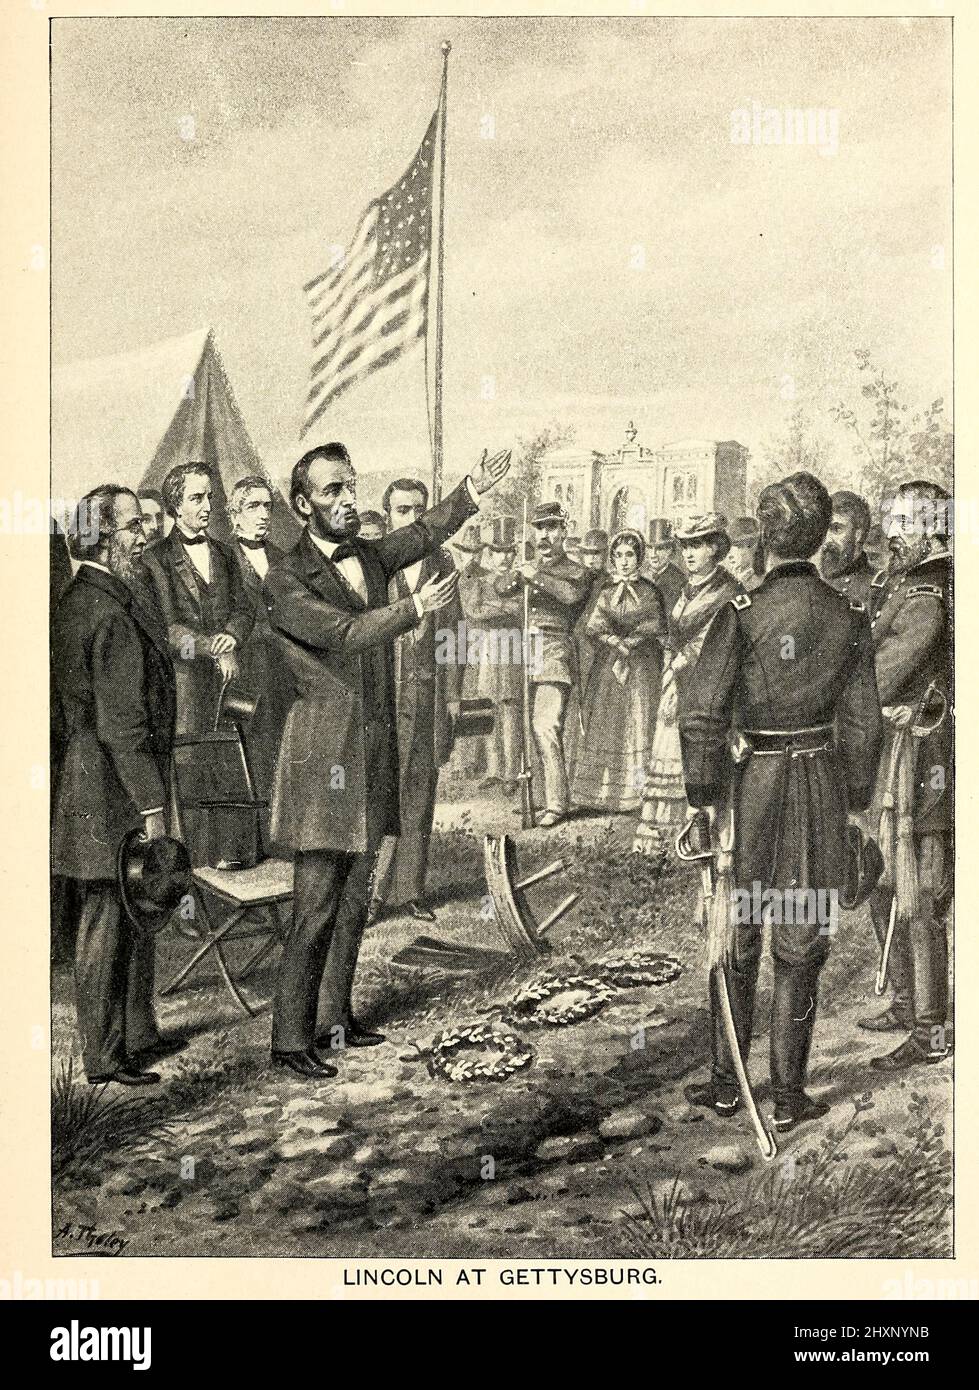 Lincoln at Gettysburg from the book ' Angels of the battlefield : a history of the labors of the Catholic sisterhoods in the late civil war ' by George Barton, Published in 1898 in Philadelphia, Pa., by The Catholic Art Publishing Company. Stock Photo